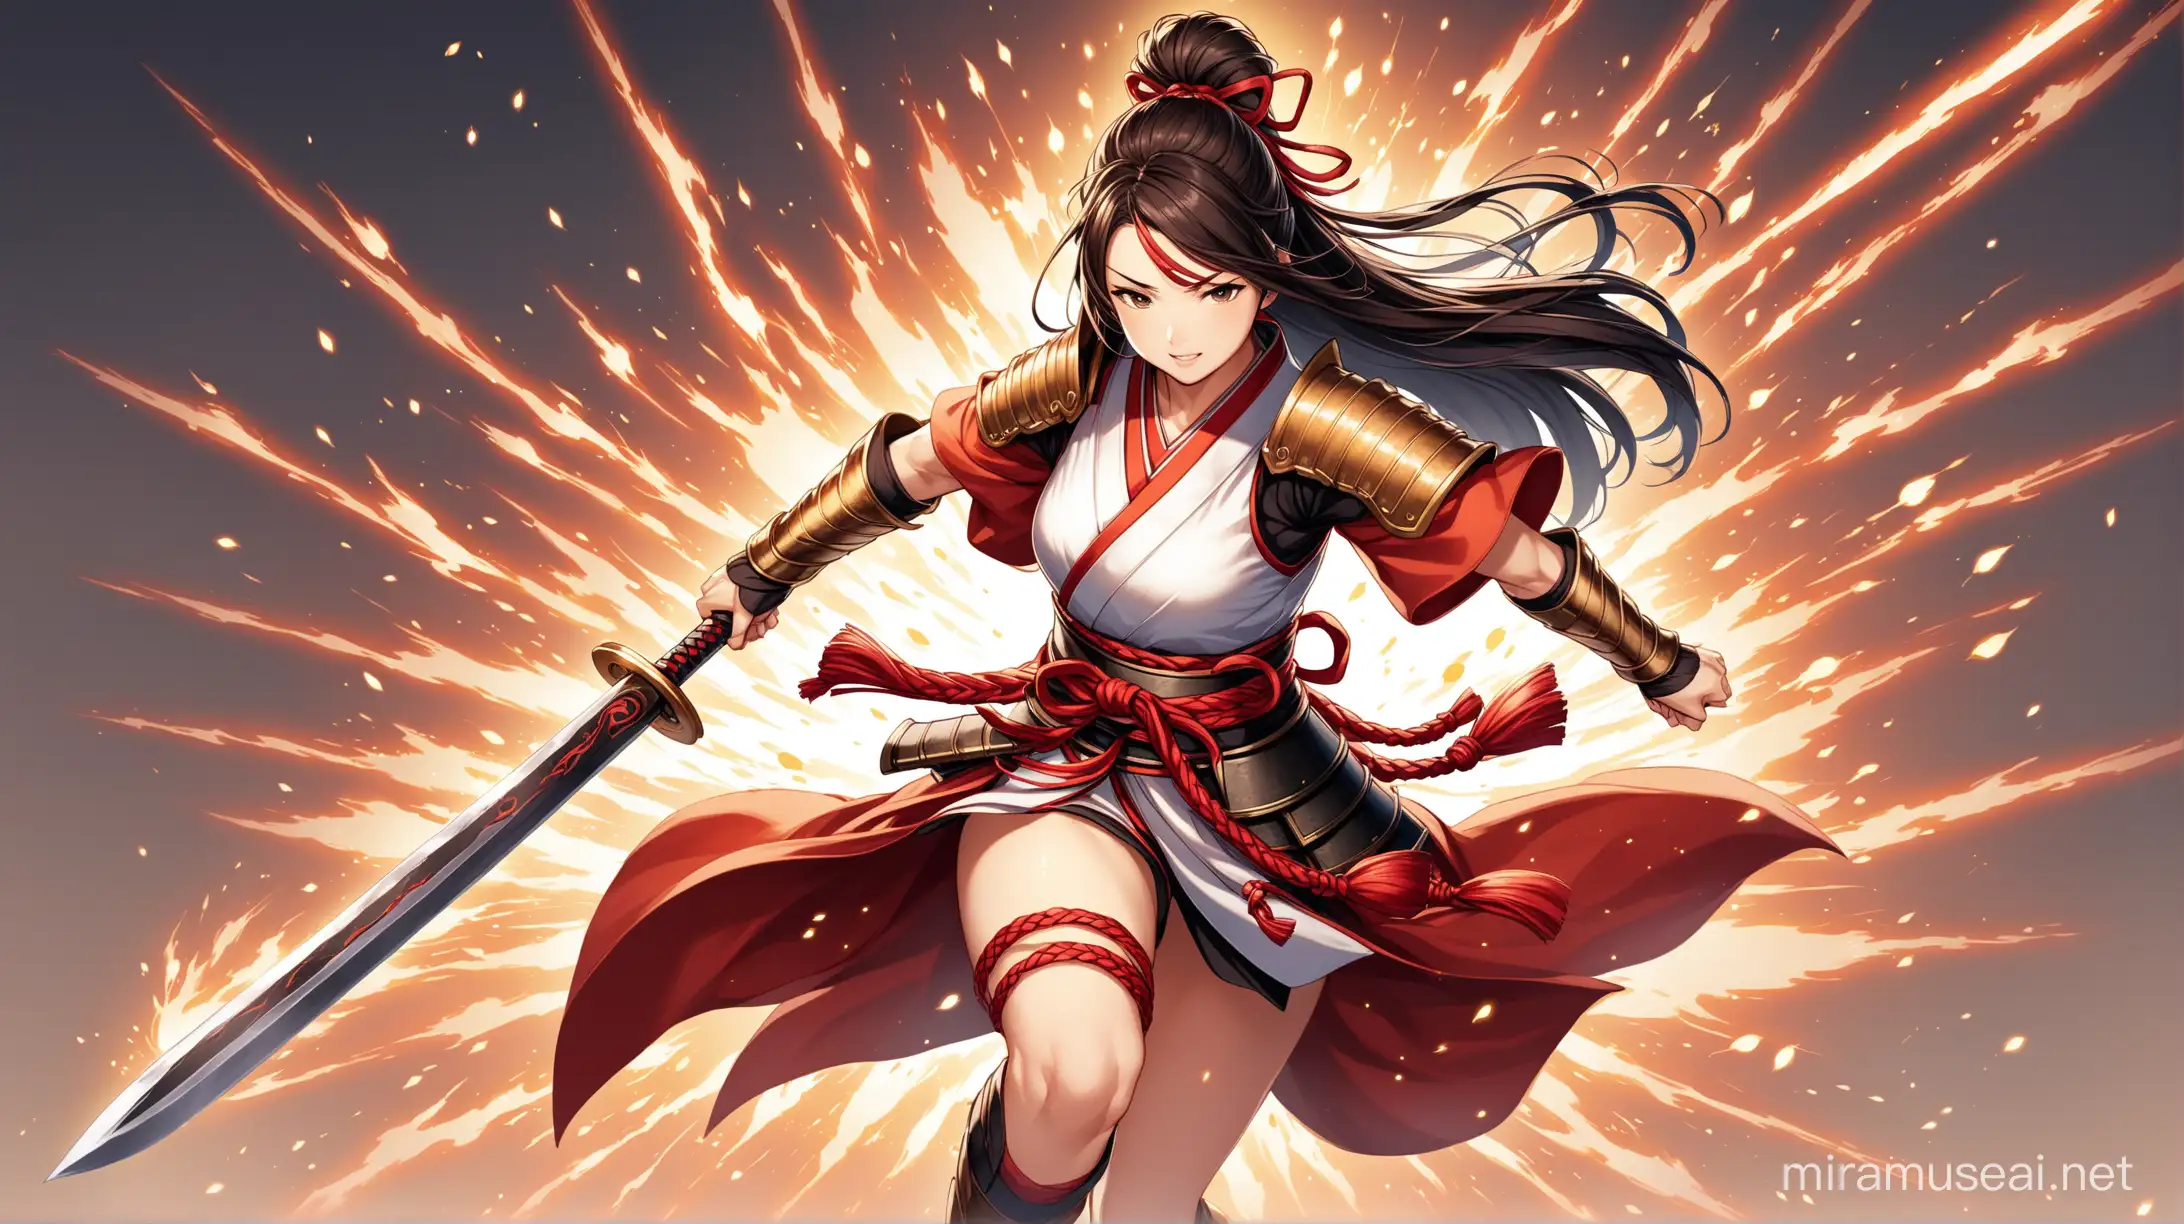 Japanese Warrior Woman with a Powerful Impact